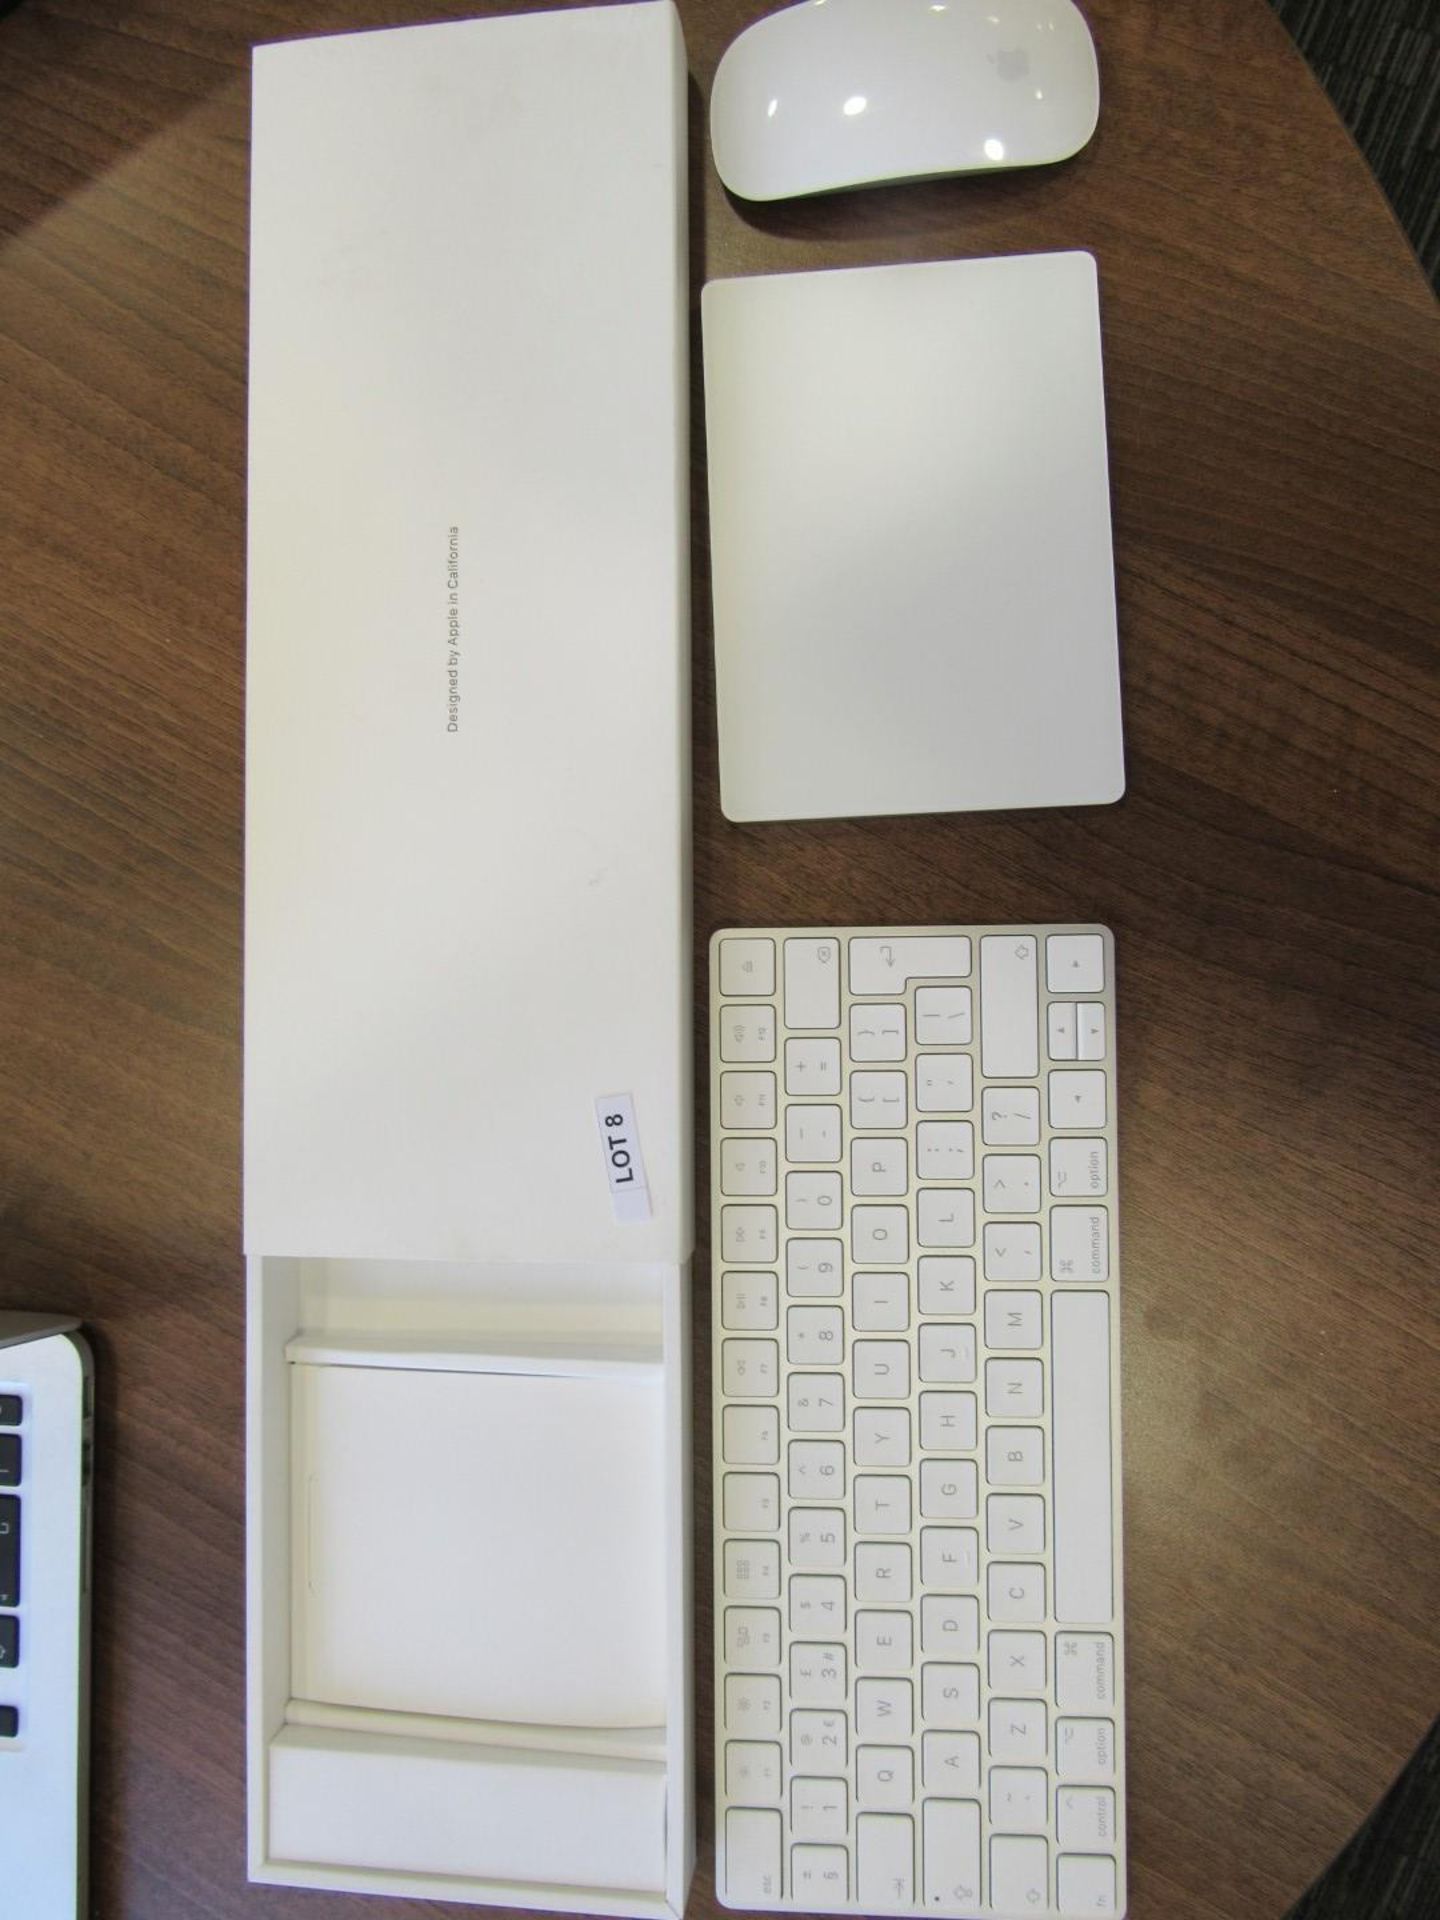 Apple A1644 Keyboard, Apple A1535 TrackPad and App